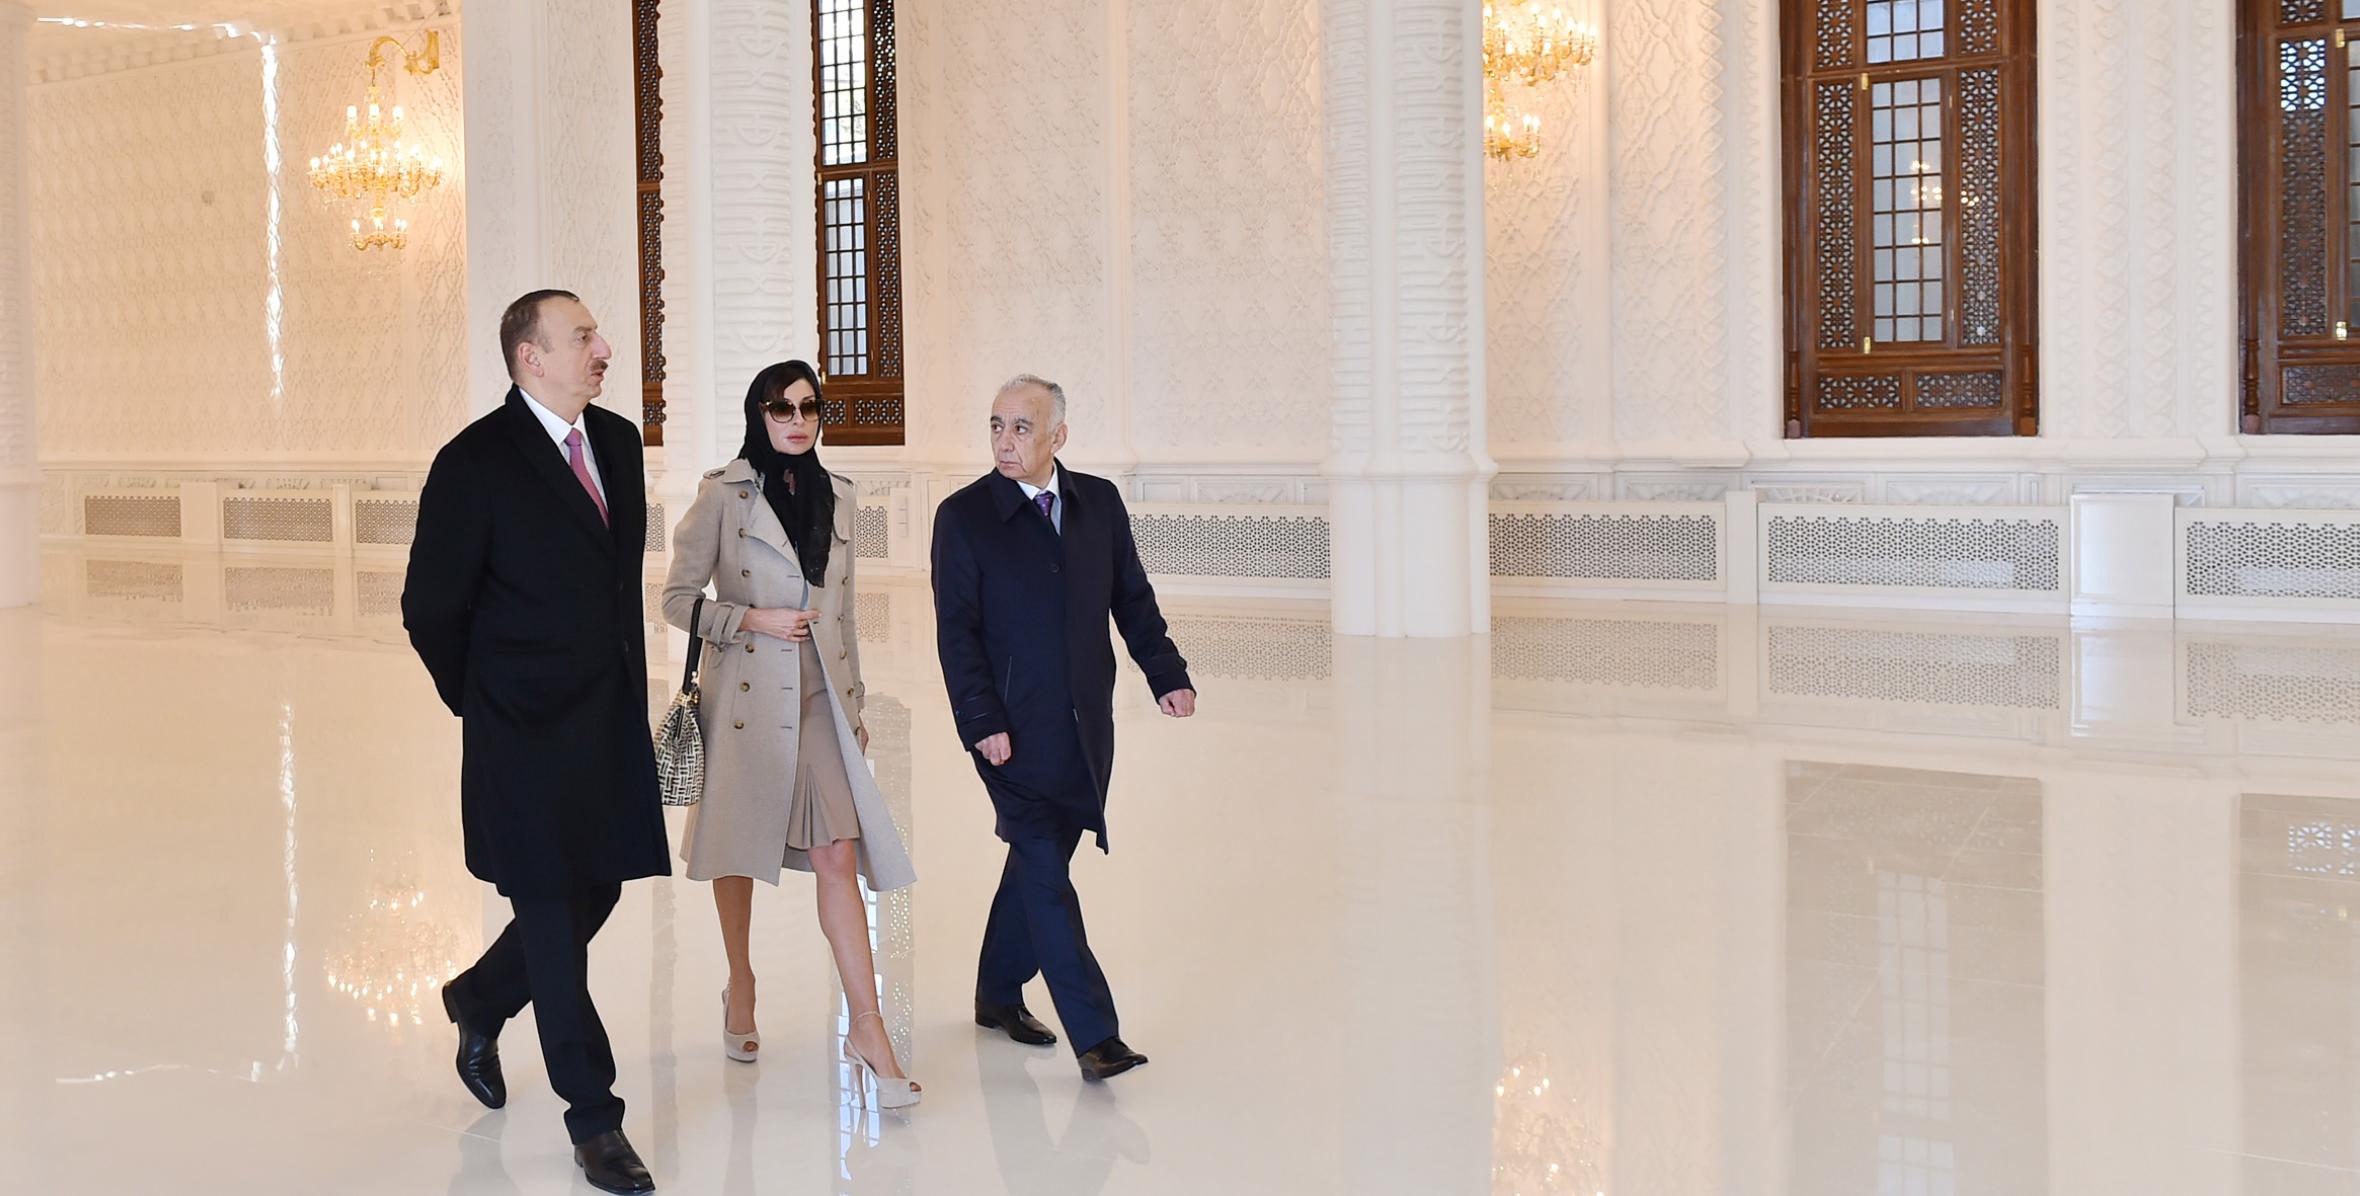 Ilham Aliyev reviewed the final stage of construction of Heydar Mosque in Baku